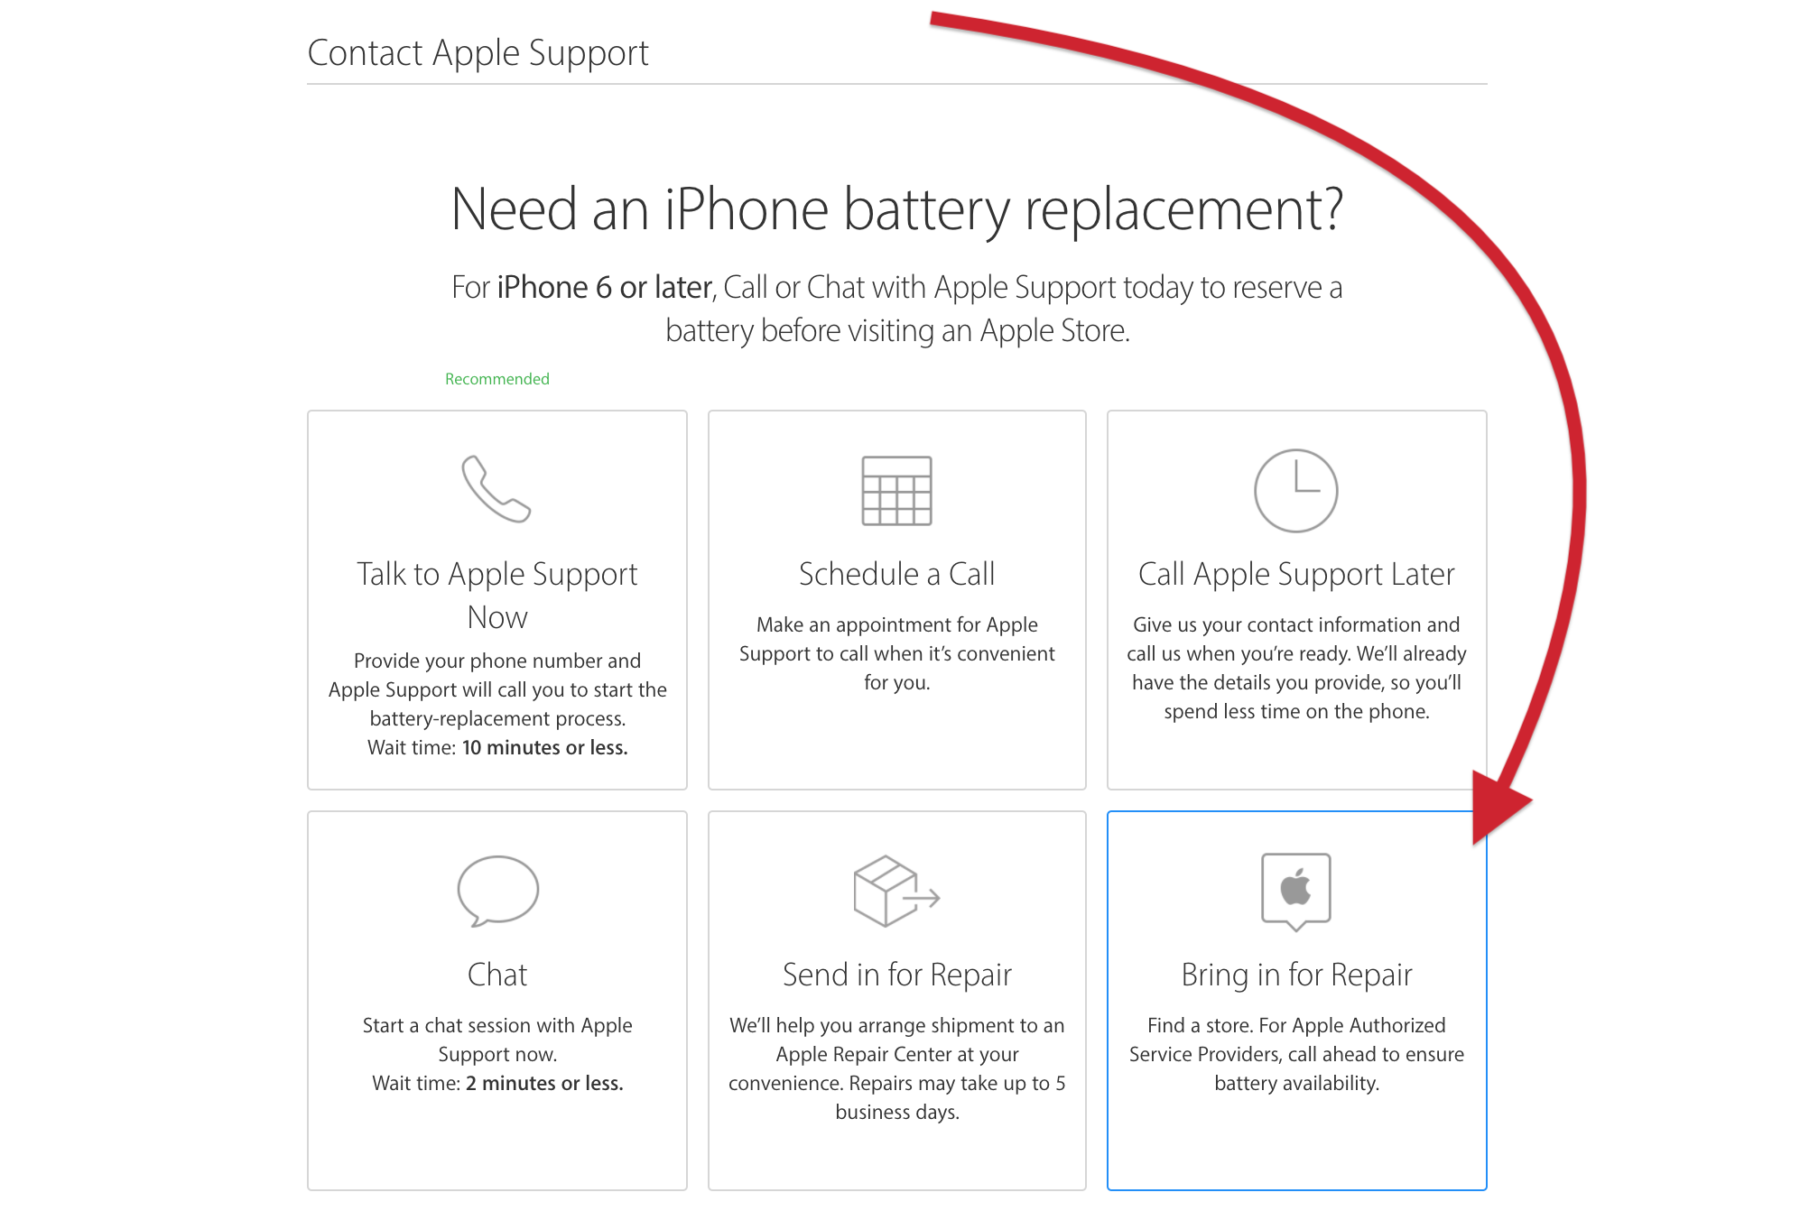 Contact Apple support or a certified repair center for a battery replacement
Make an appointment to bring your iPhone in for repair